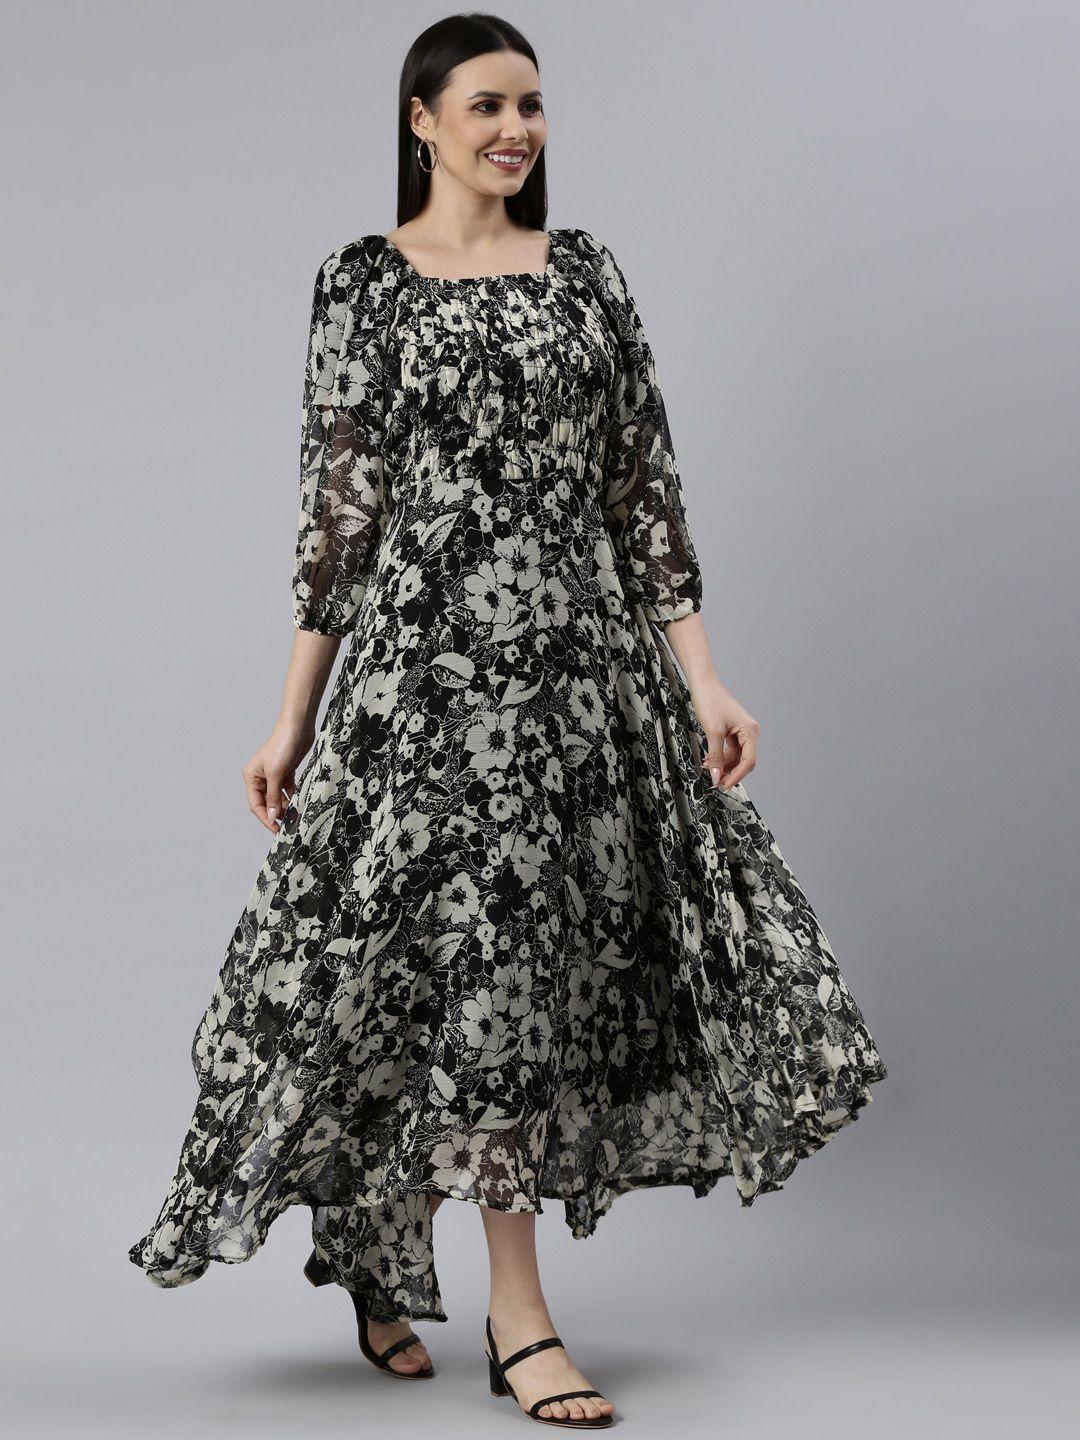 Souchii Floral Printed Square Neck Puff Sleeves Smocked Fit & Flare Dress